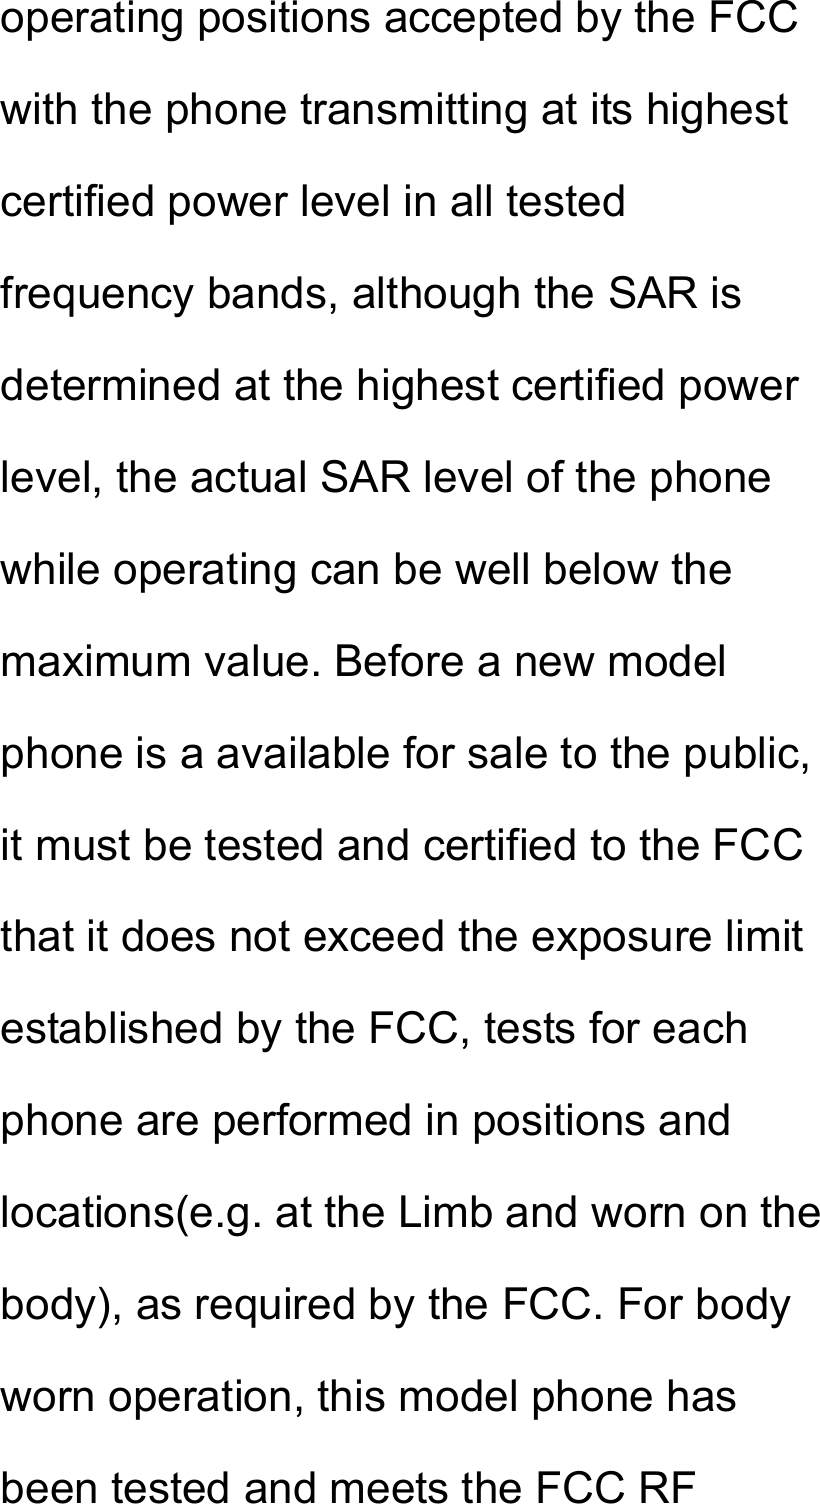 operating positions accepted by the FCC with the phone transmitting at its highest certified power level in all tested frequency bands, although the SAR is determined at the highest certified power level, the actual SAR level of the phone while operating can be well below the maximum value. Before a new model phone is a available for sale to the public, it must be tested and certified to the FCC that it does not exceed the exposure limit established by the FCC, tests for each phone are performed in positions and locations(e.g. at the Limb and worn on the body), as required by the FCC. For body worn operation, this model phone has been tested and meets the FCC RF 